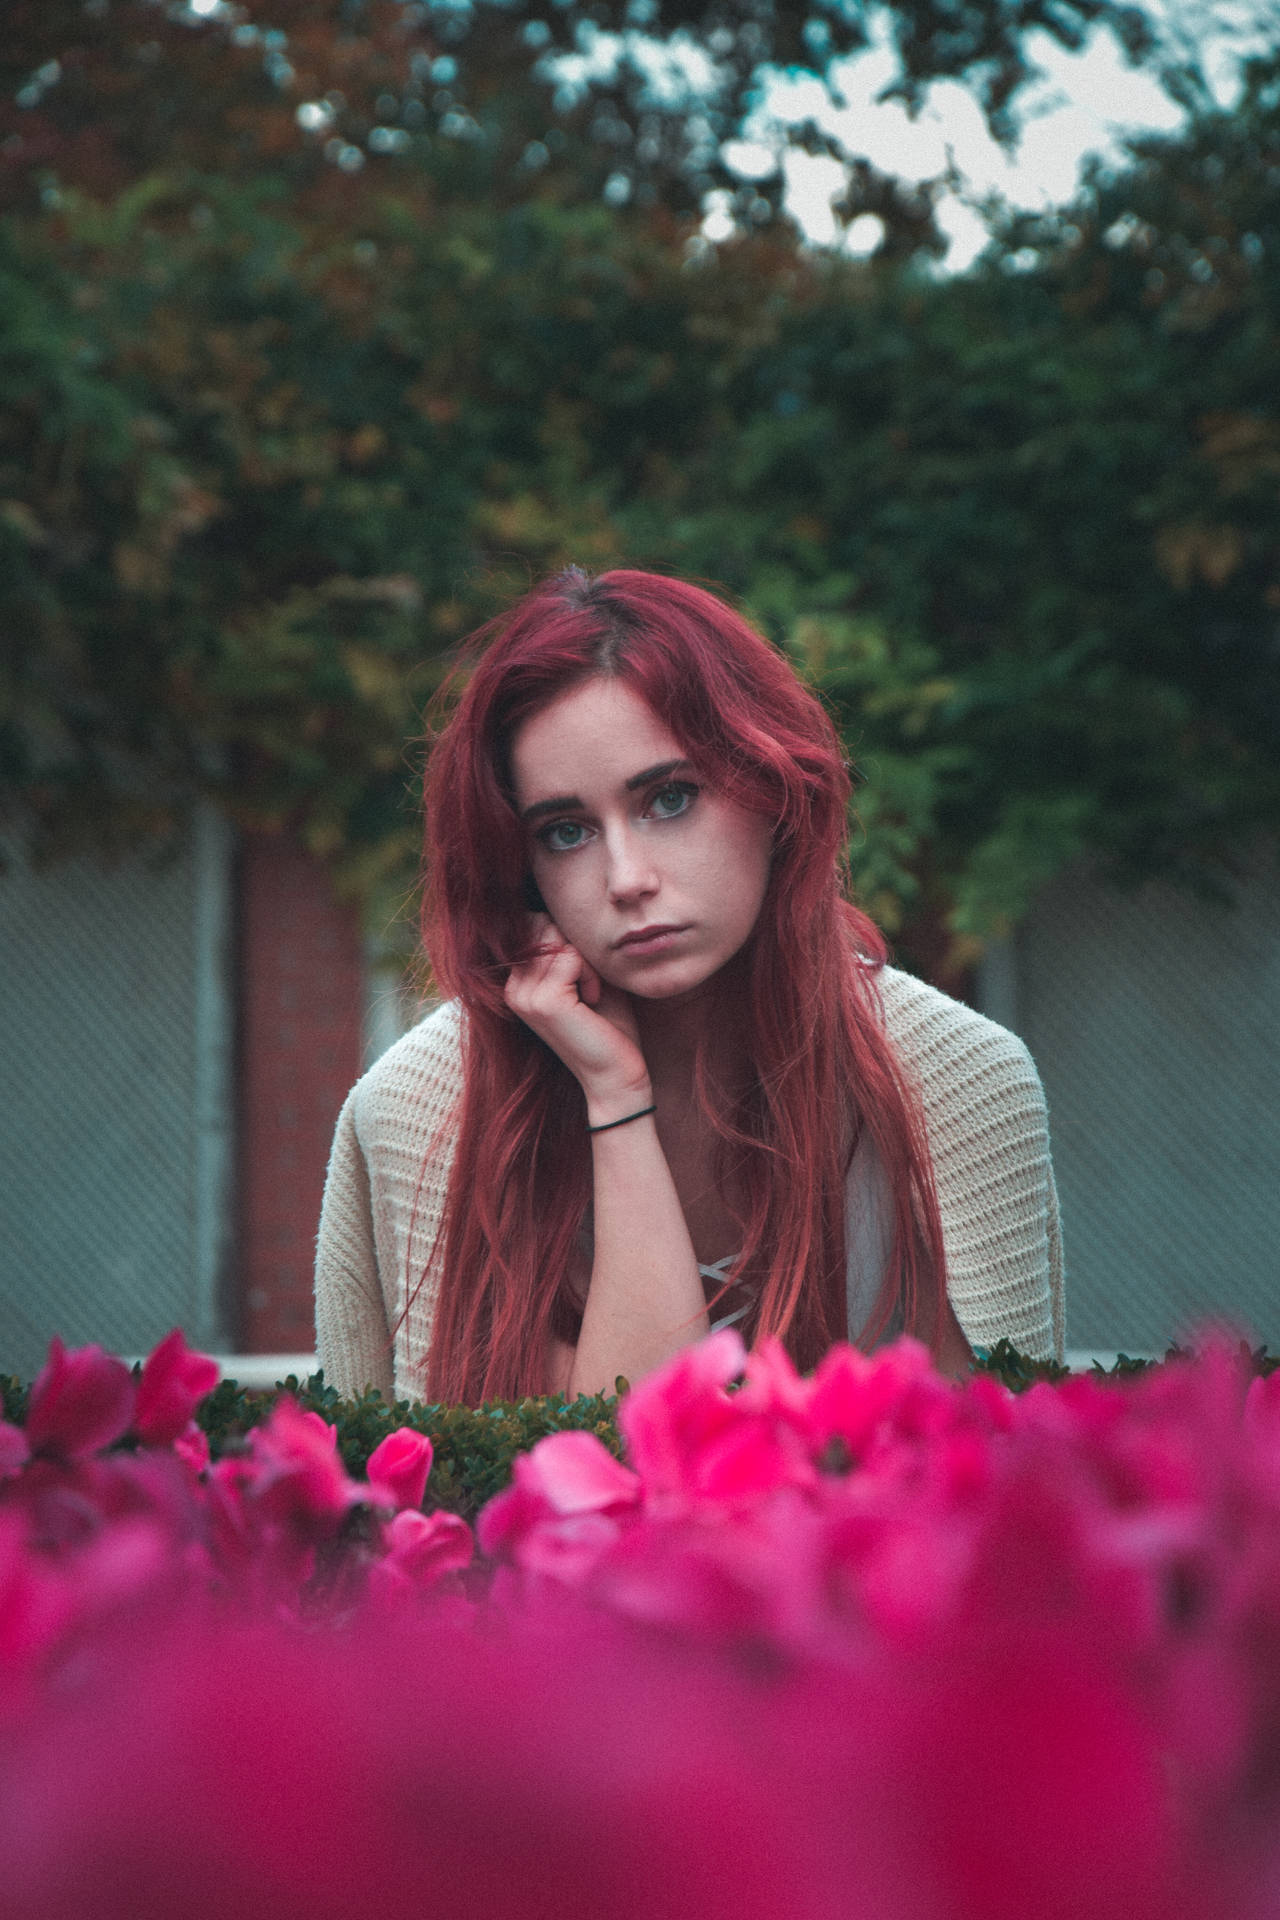 Cool Sad Girl With Flowers Background